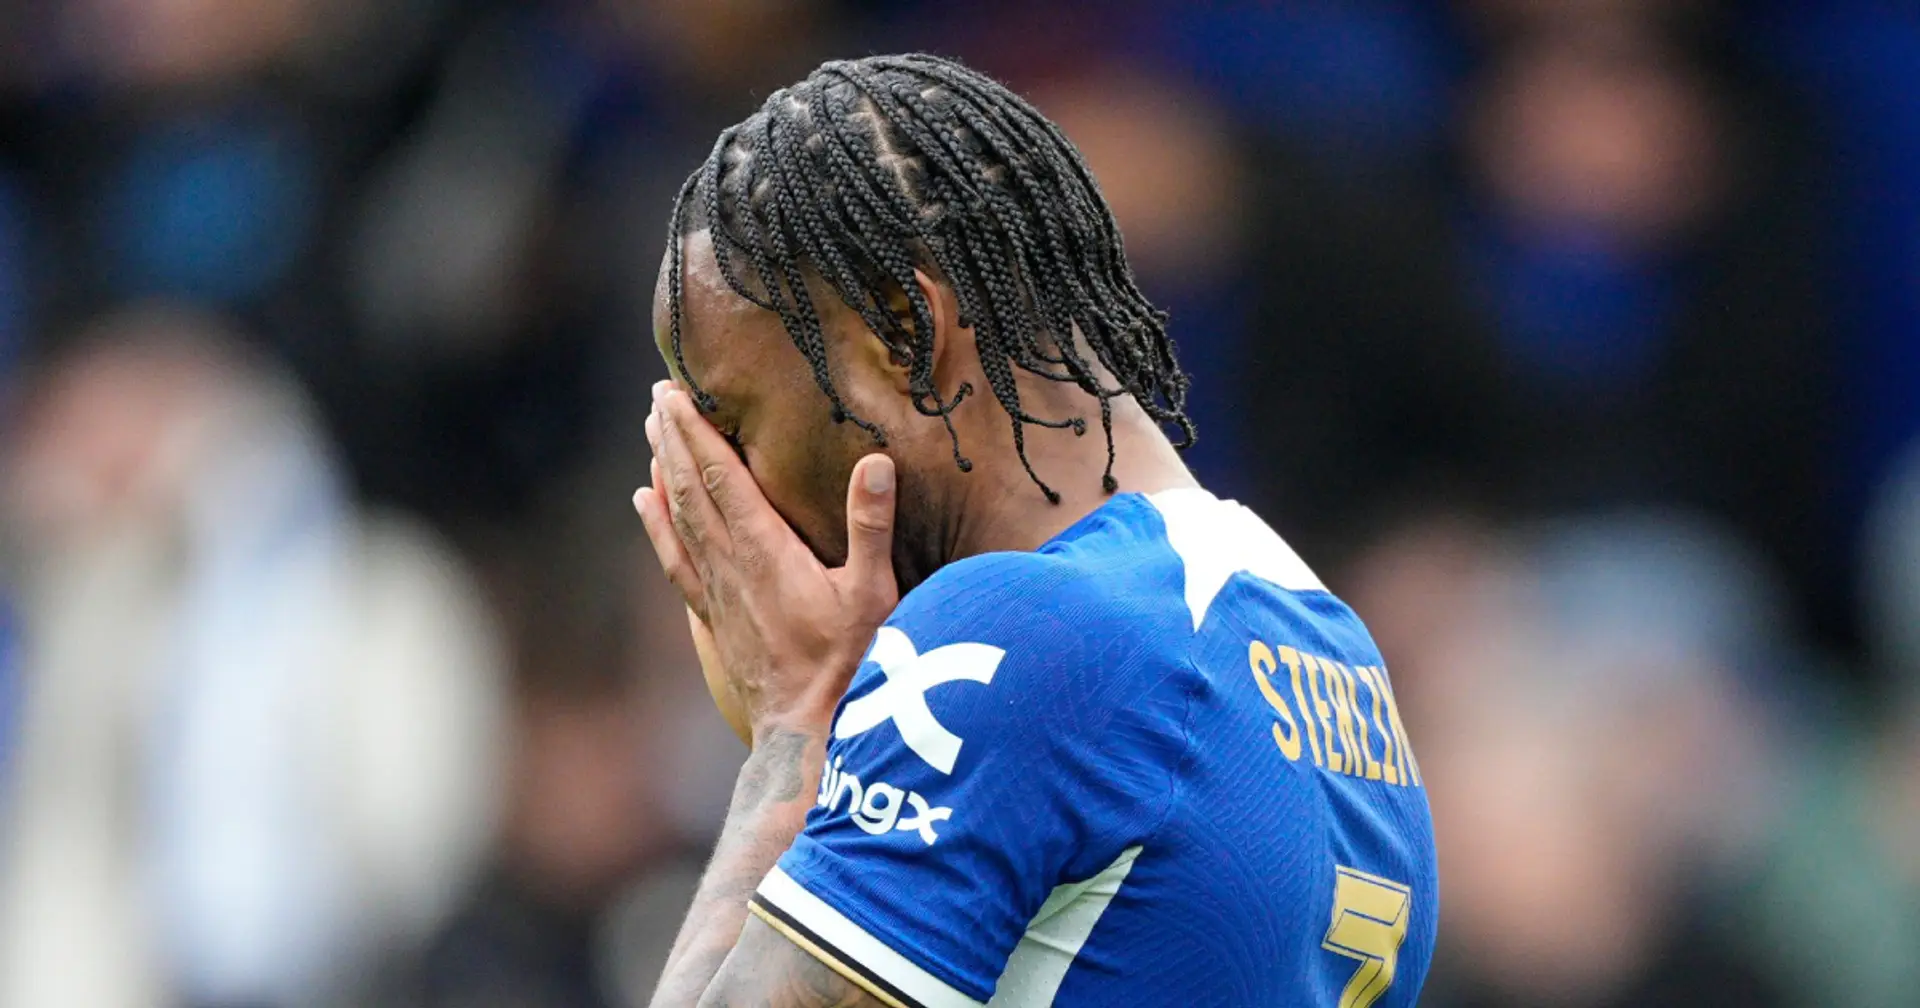 Raheem Sterling sends message to Chelsea fans after poor performance vs Leicester